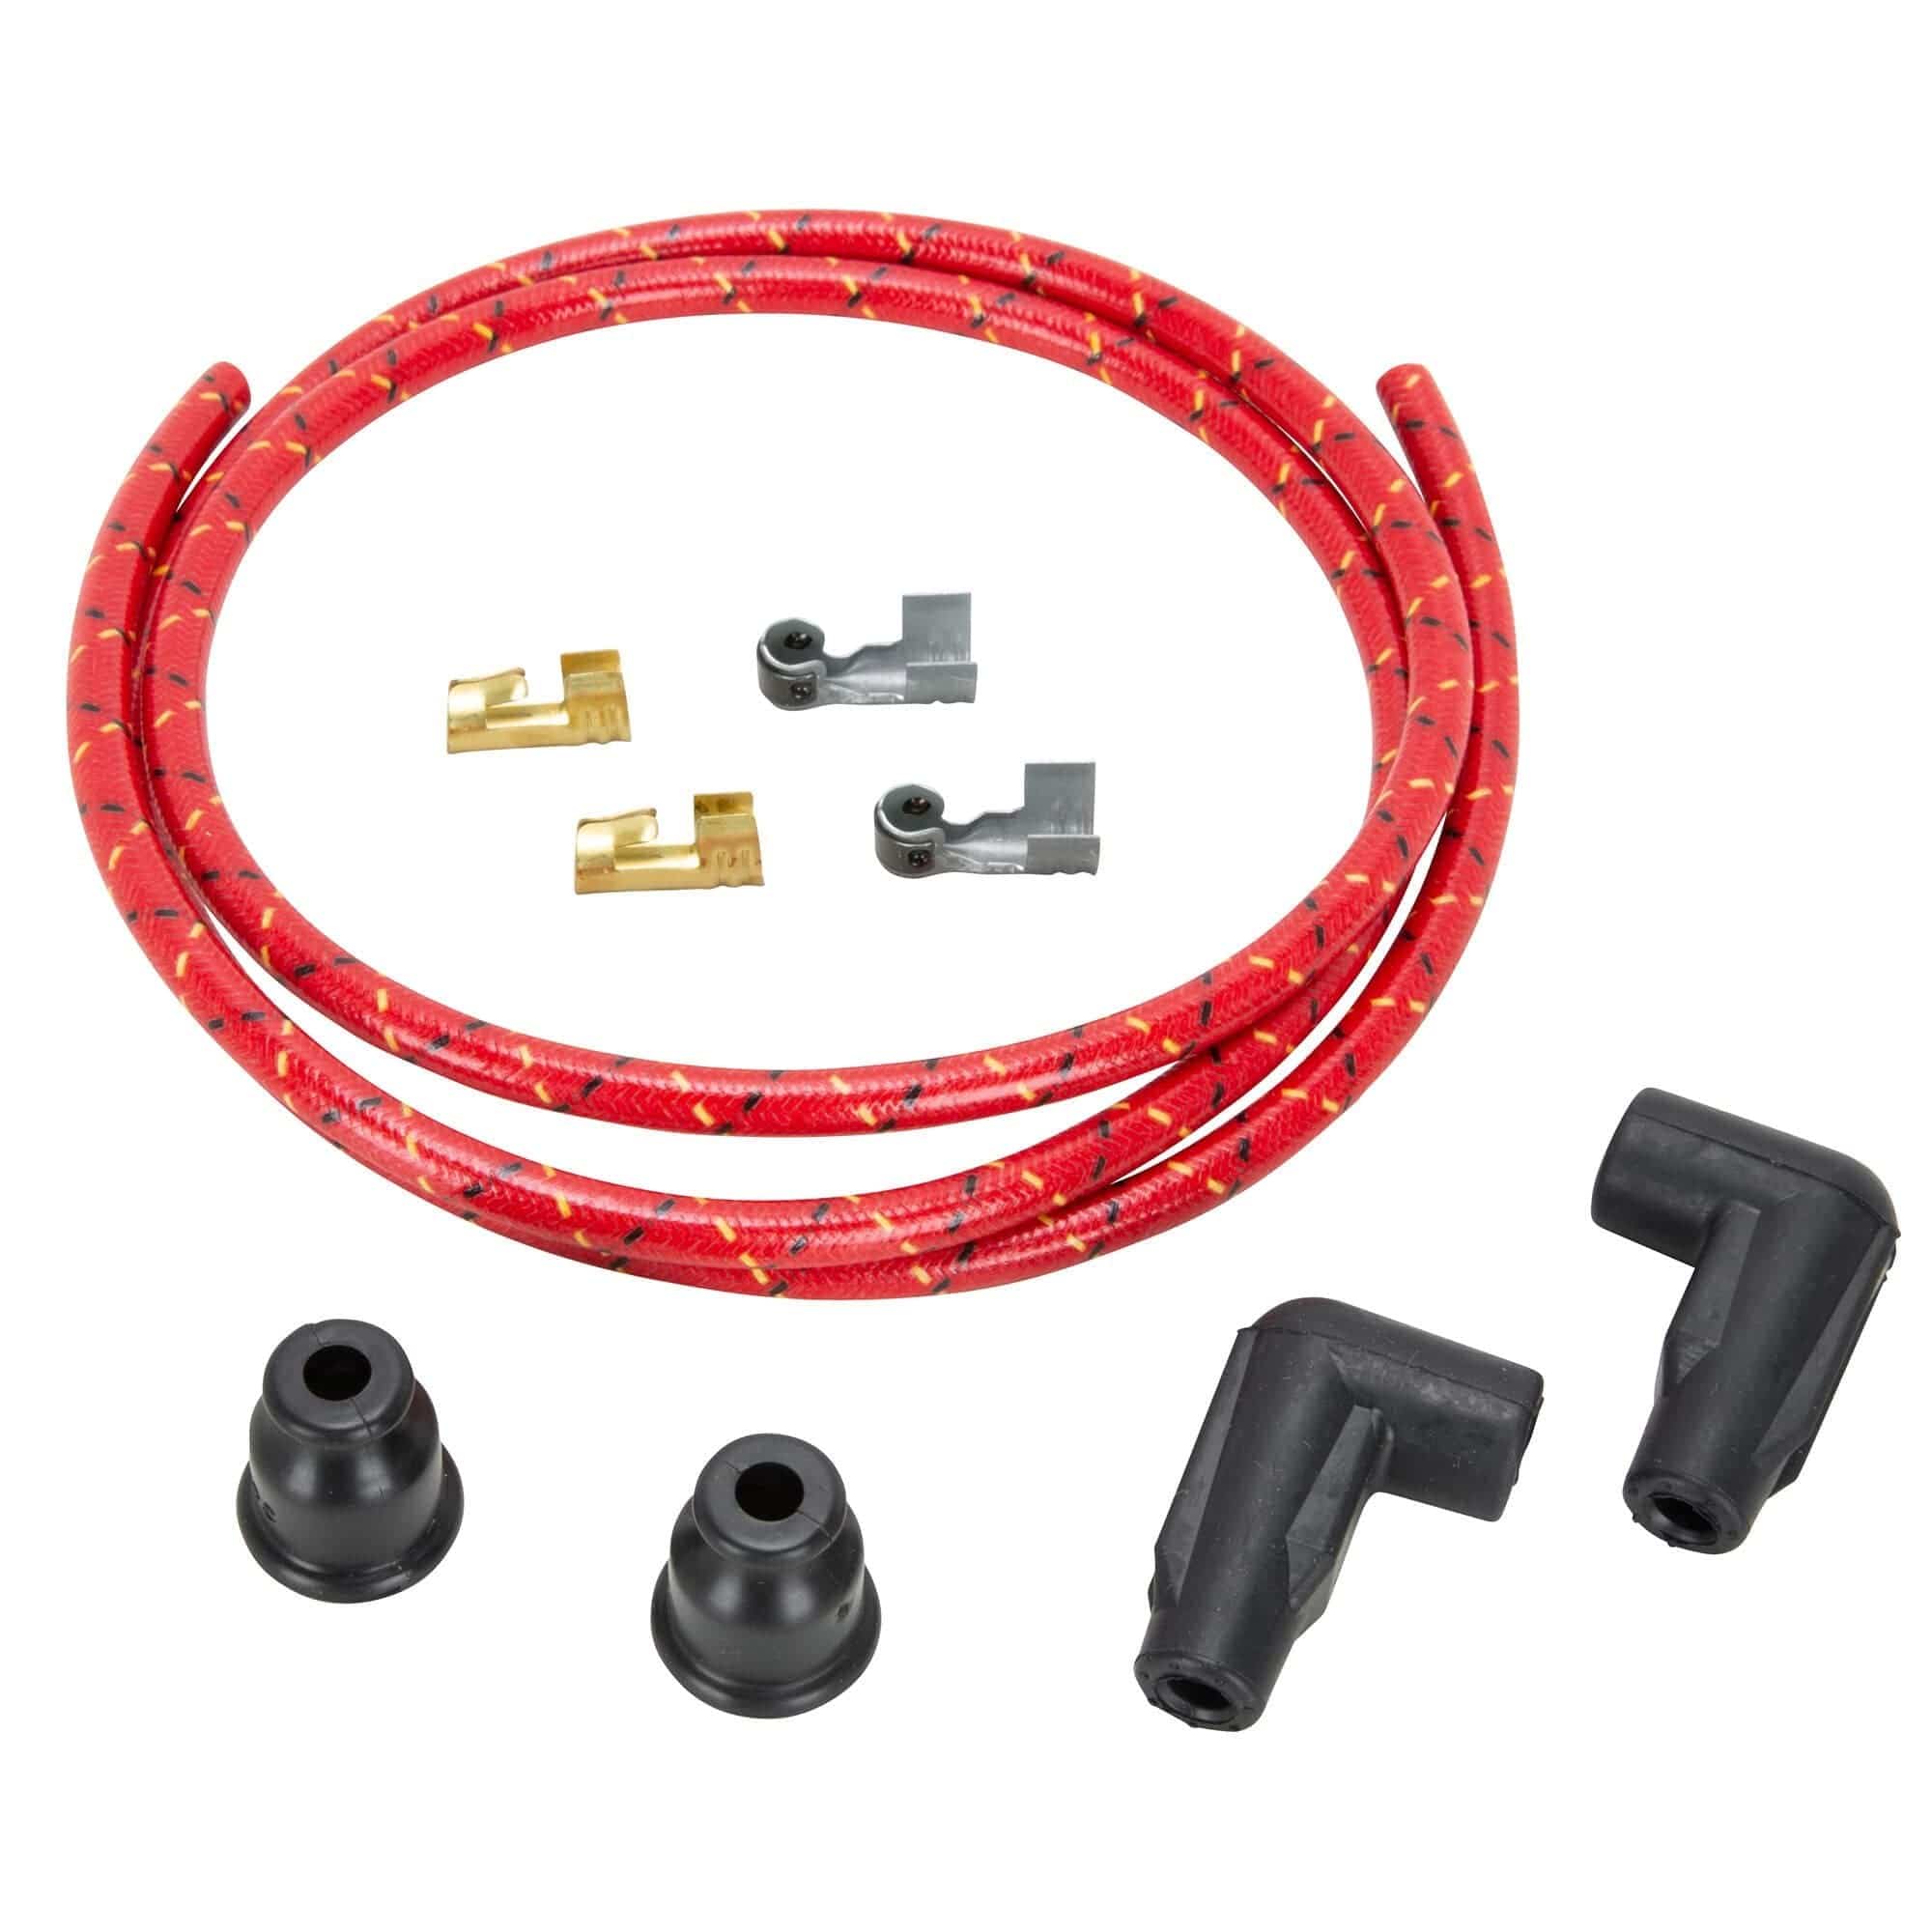 https://www.lowbrowcustoms.com/cdn/shop/products/010599-lowbrow-customs-7mm-solid-core-cloth-90-degree-spark-plug-wire-sets-red-w-black-and-yellow-tracers-1_e63eb214-7a7c-45c6-a03f-d68070102a15_2000x.jpg?v=1622525146